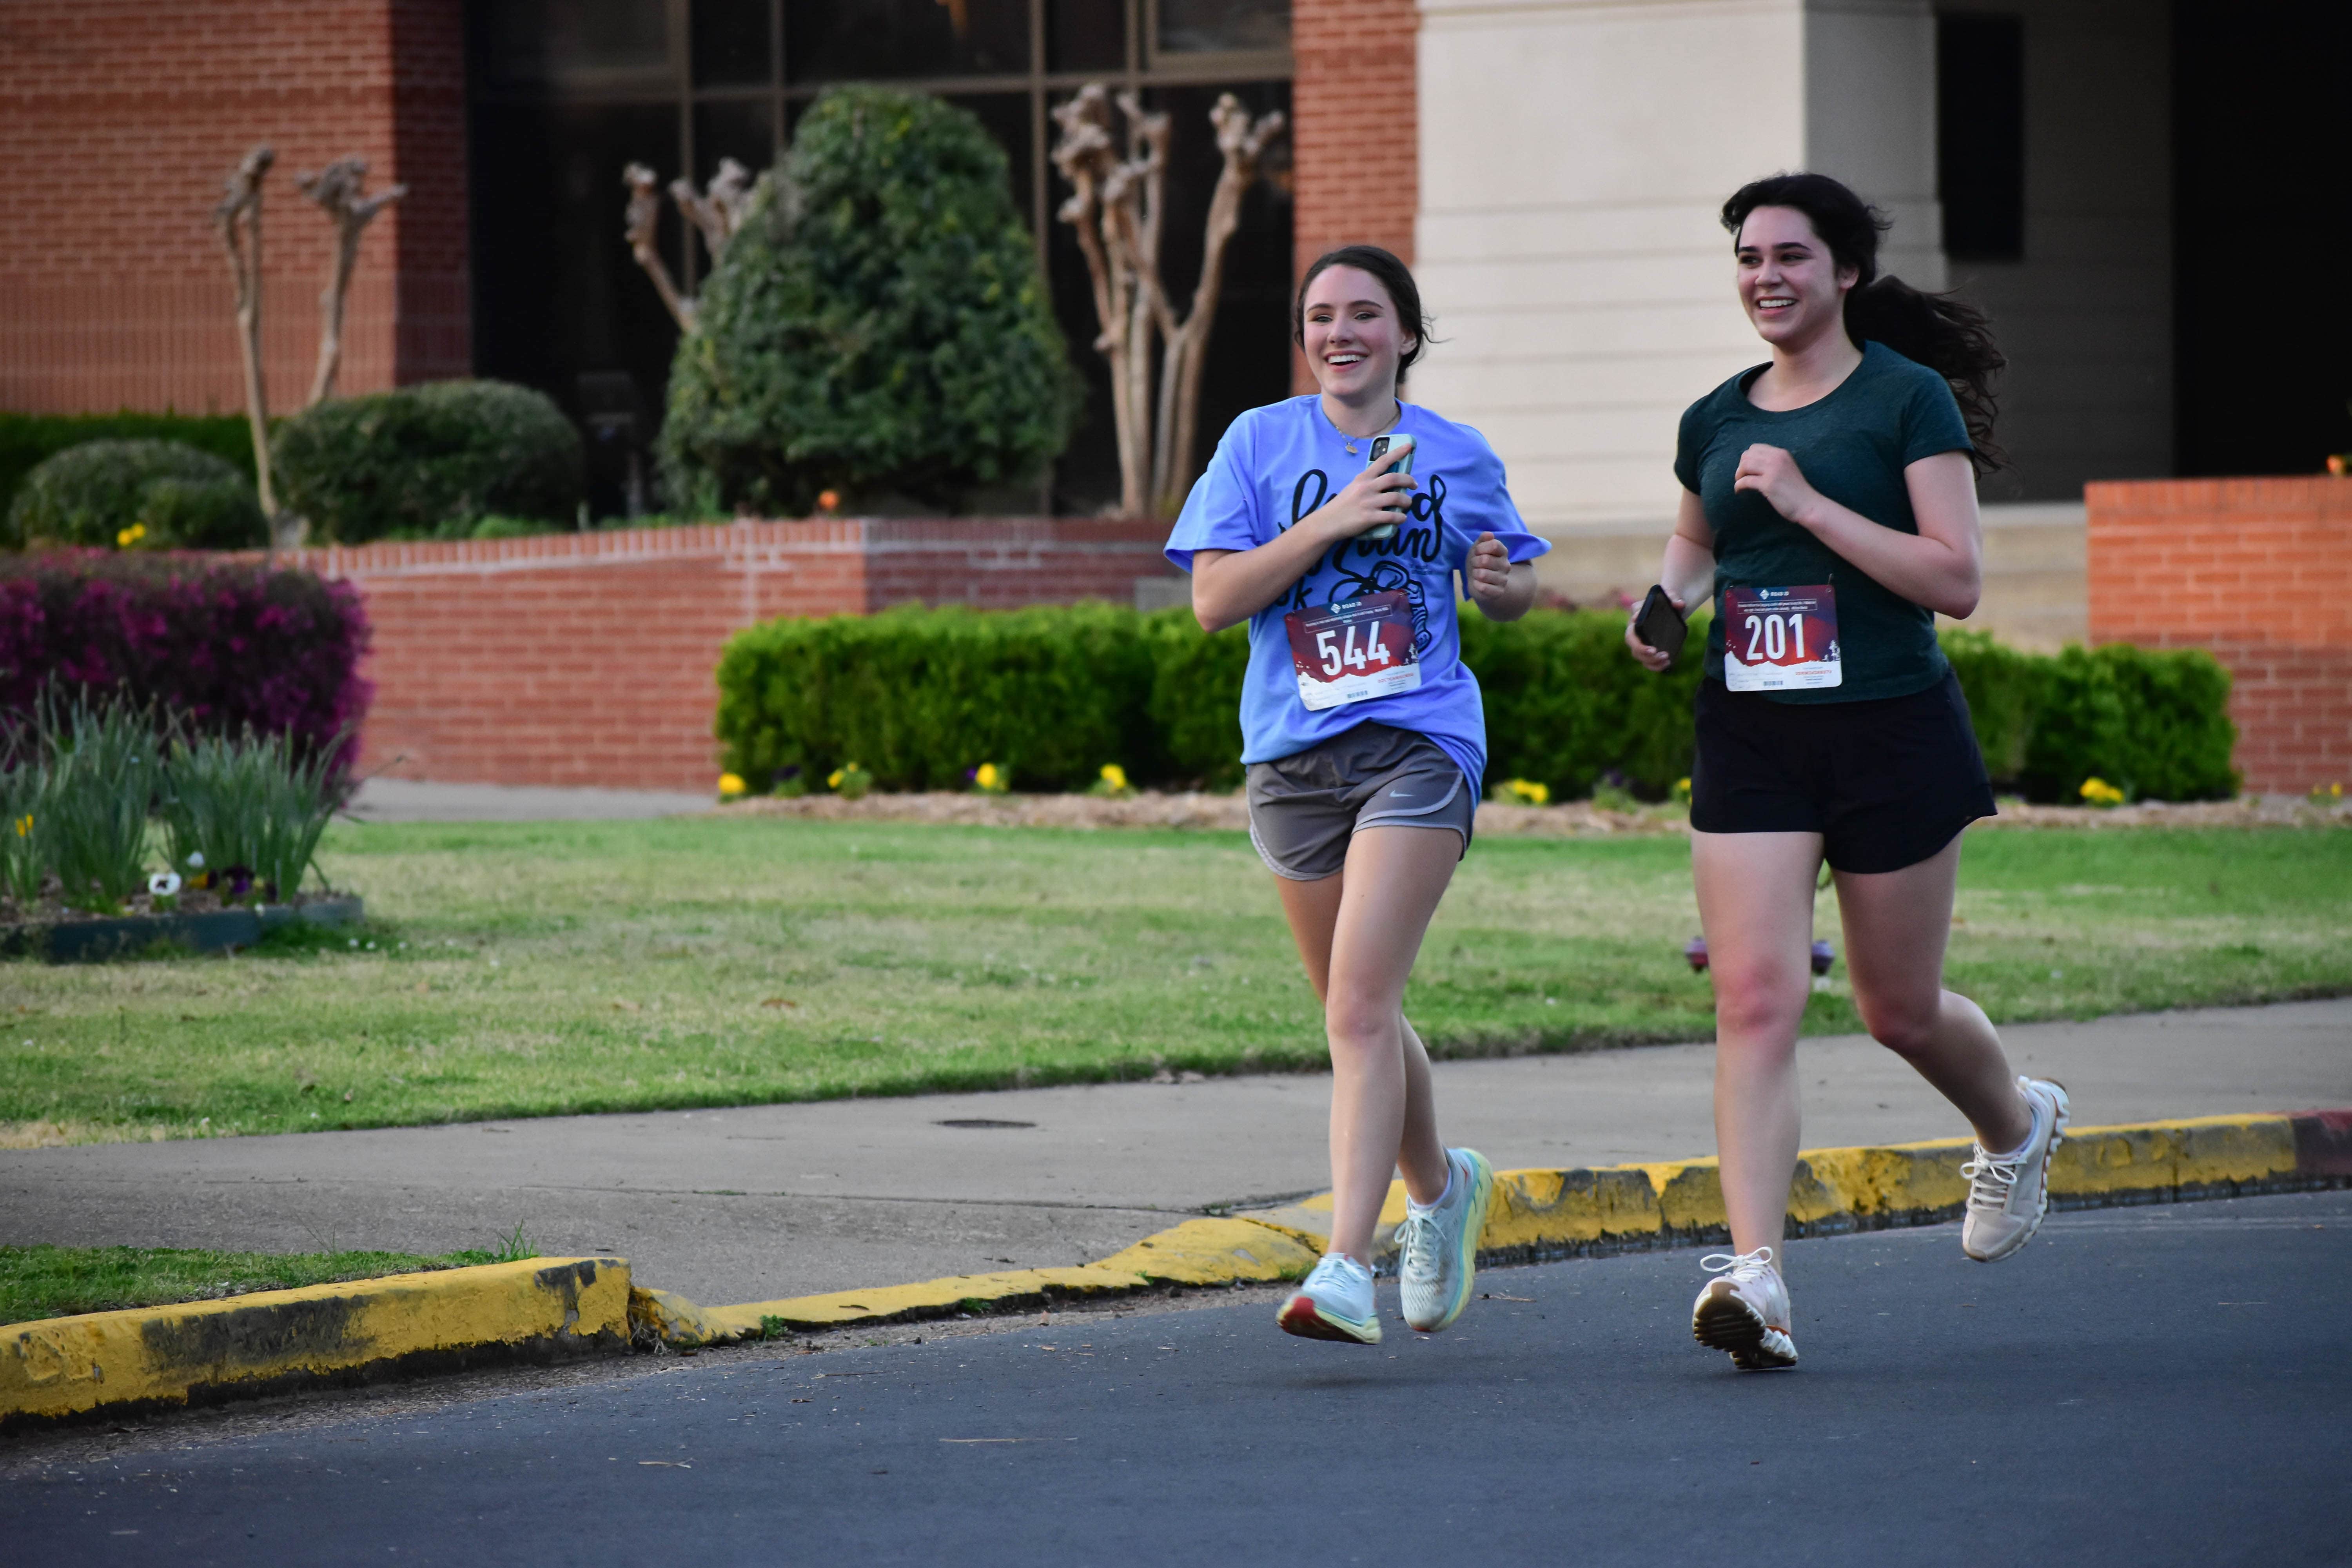 Race with purpose: Fund Run raises money for student scholarships